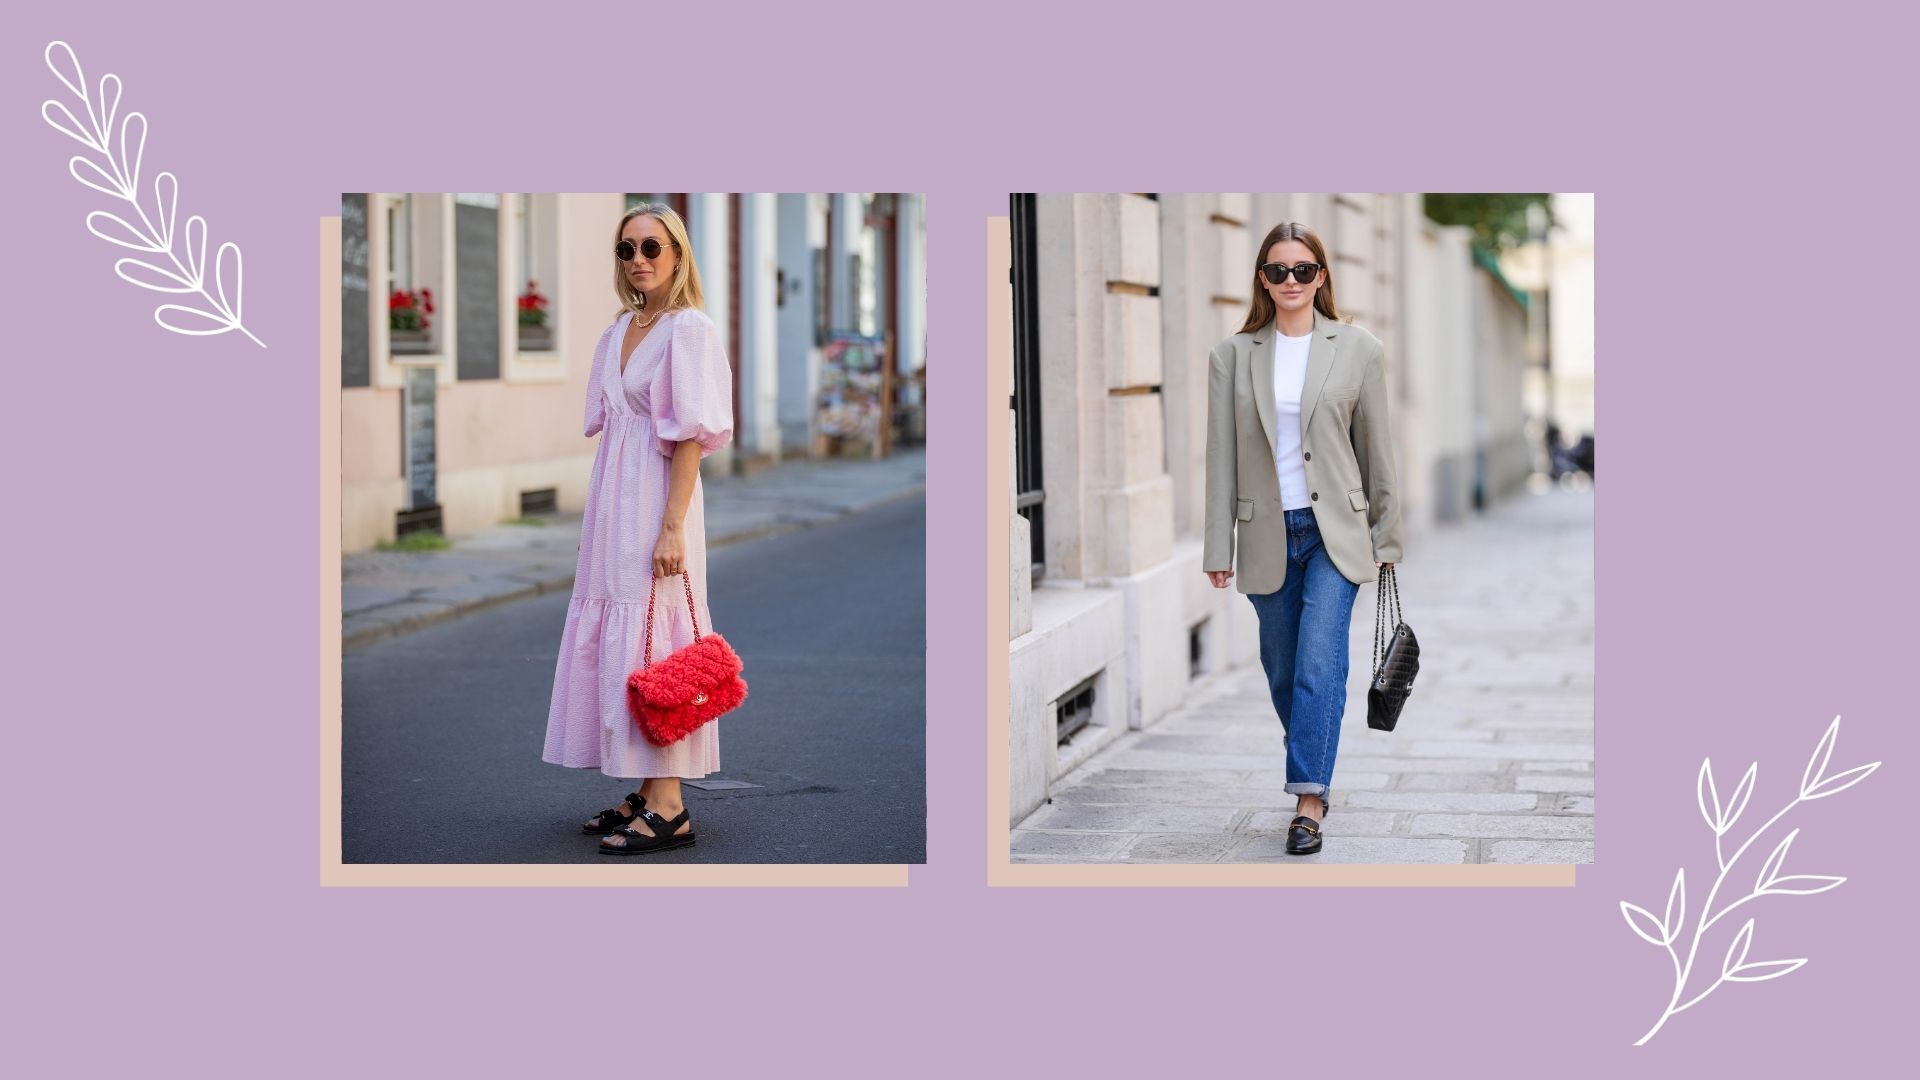 How to Take An Outfit From Day to Date Night - The Lane to Fashion